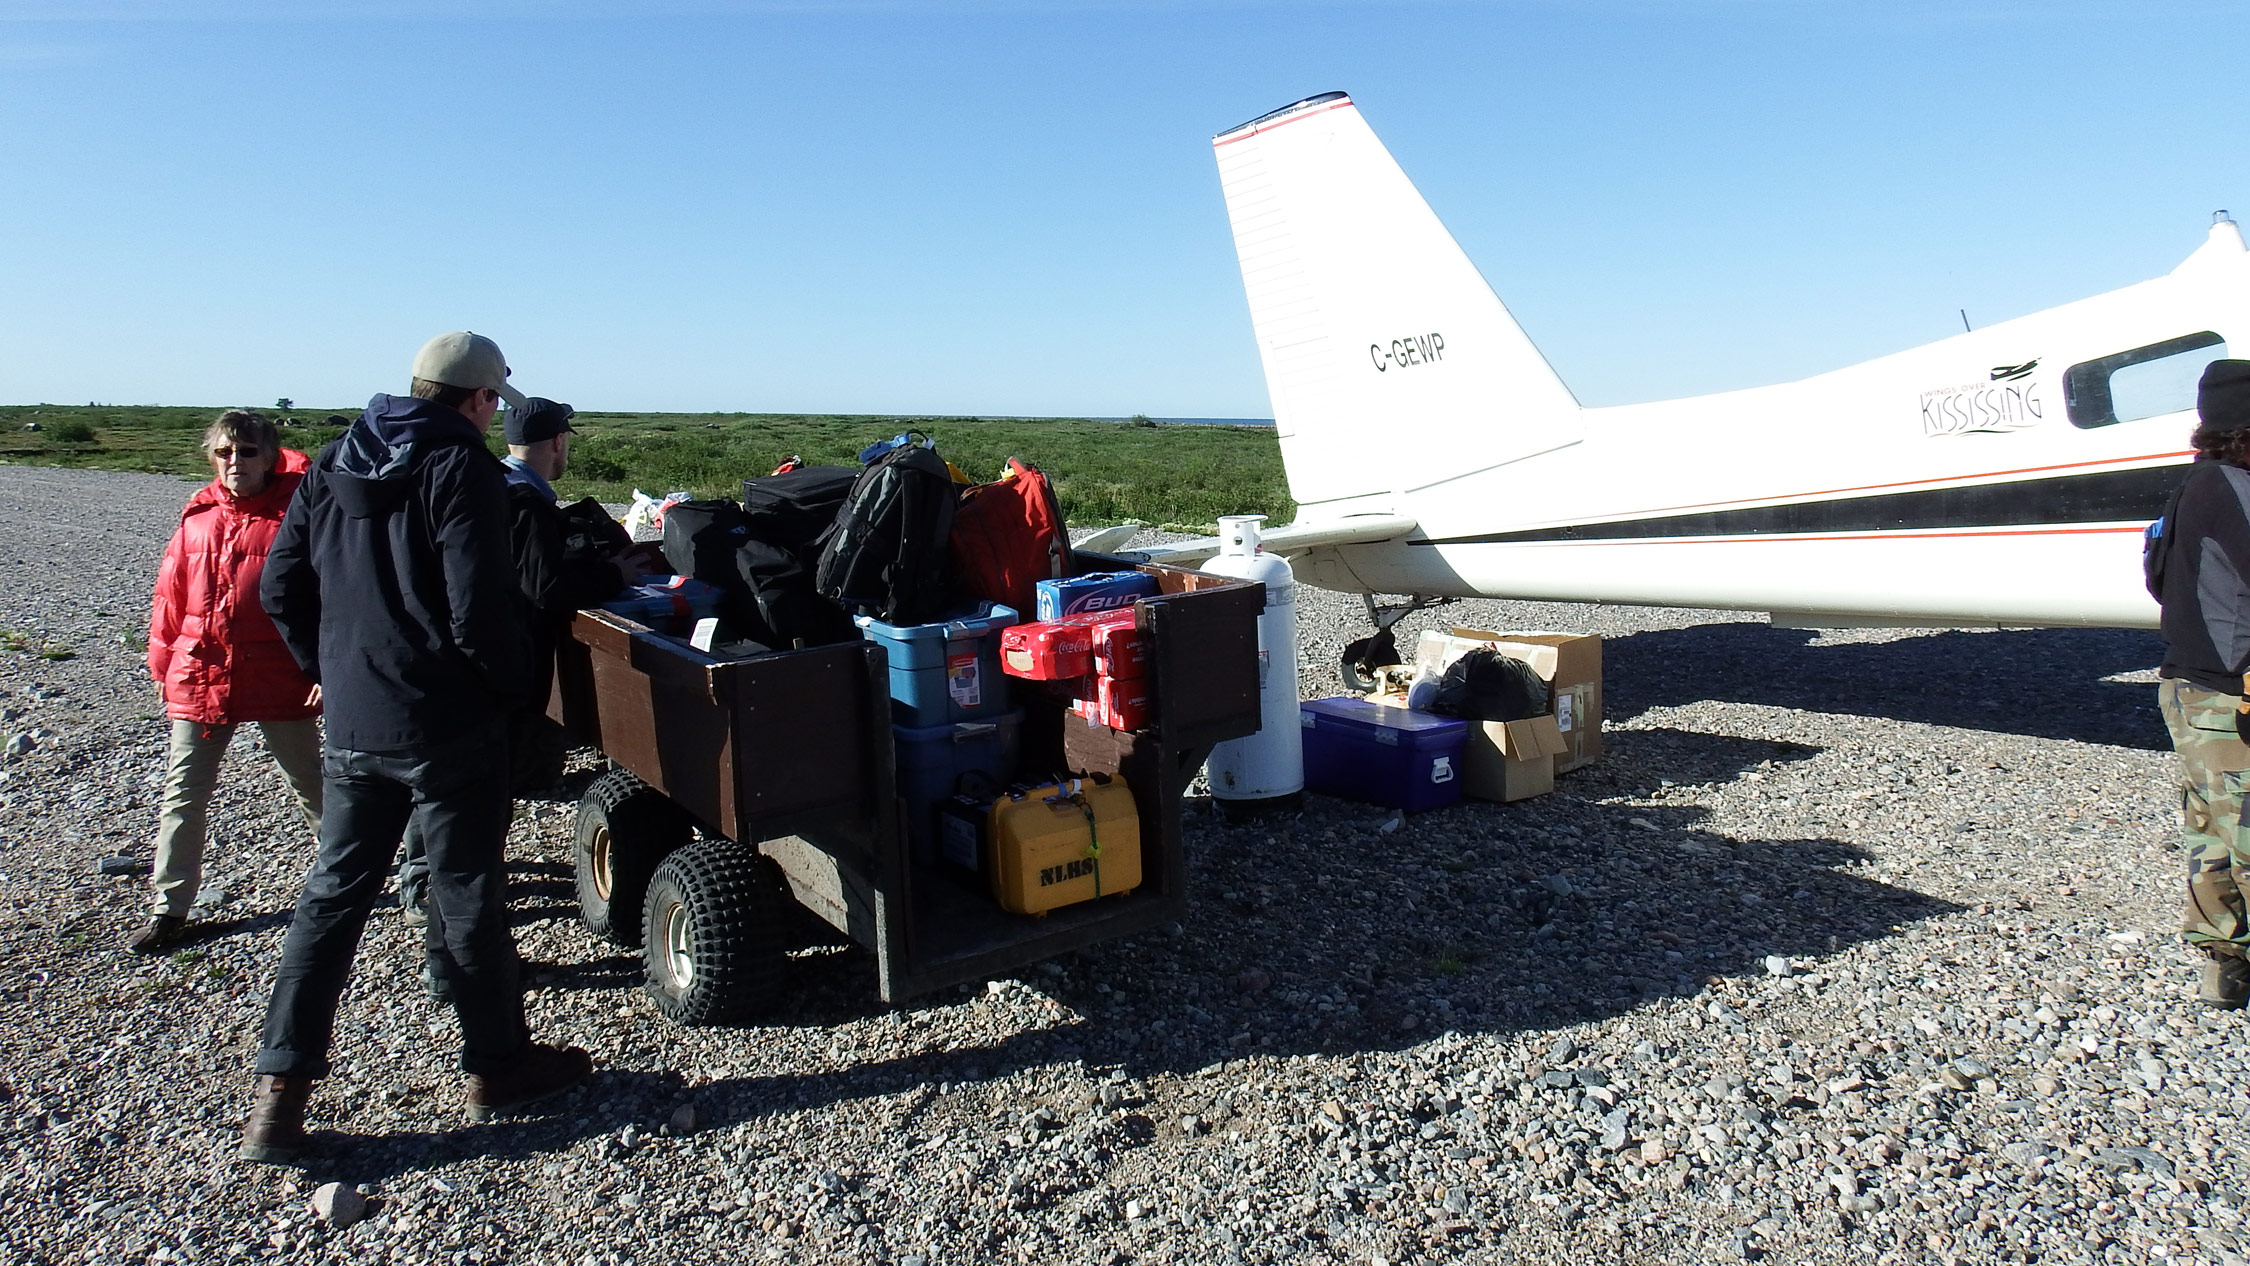 Loading up the field gear in Churchill, Manitoba